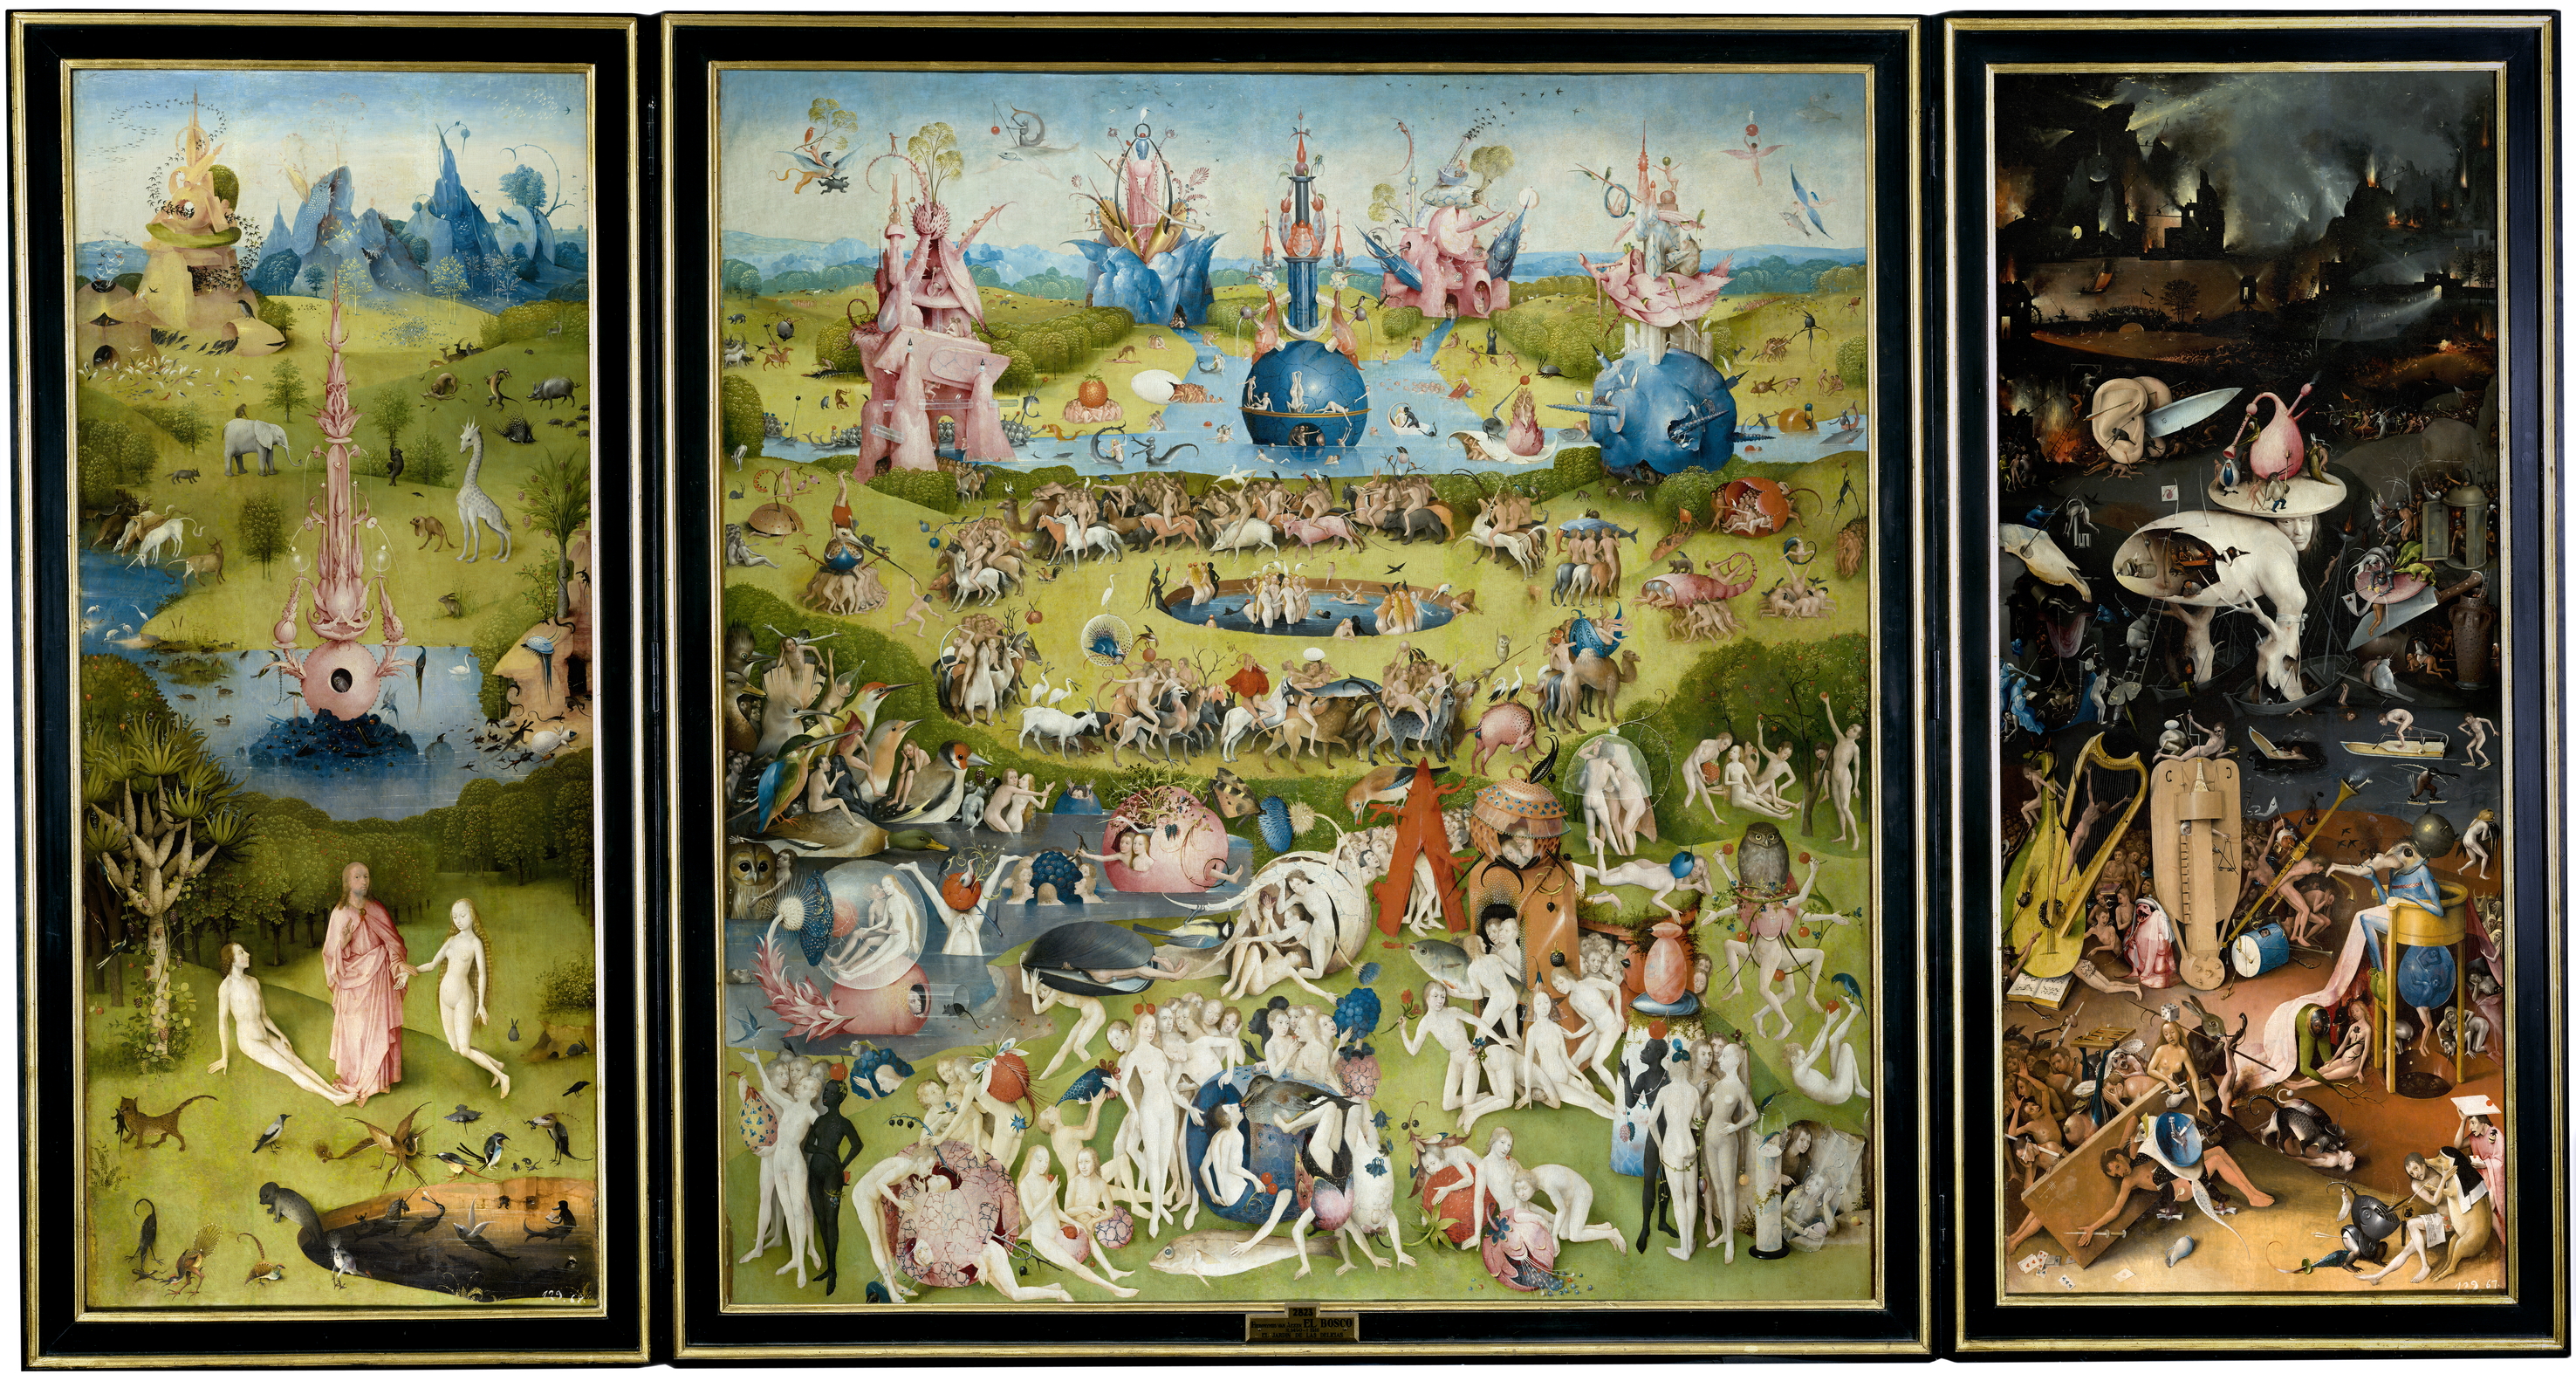 The garden of earthly delights by Hieronymus Bosch